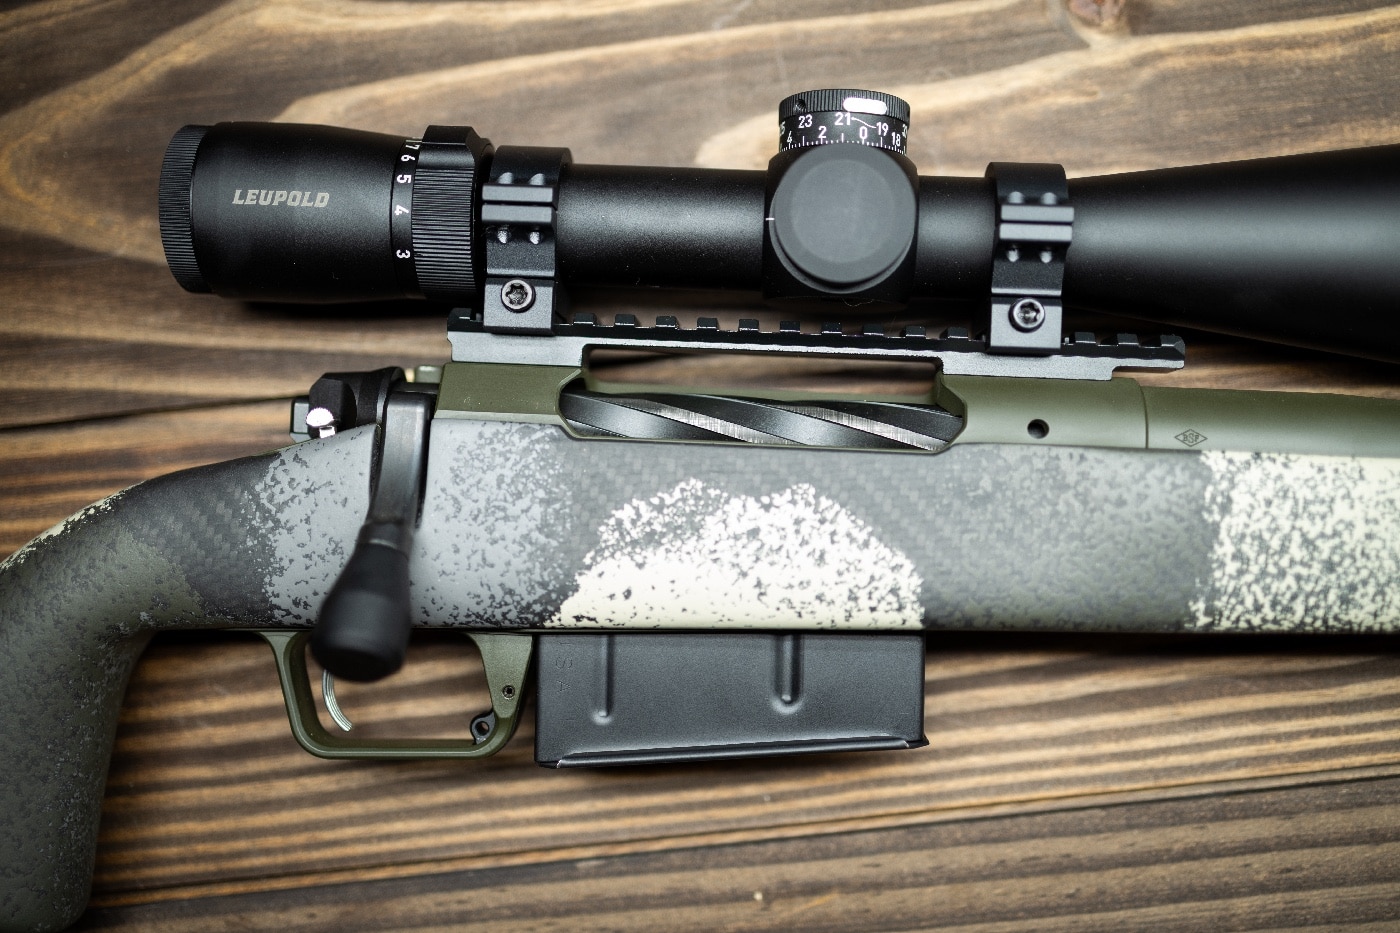 In this photo of the Springfield Model 2020 Long Action Waypoint review, we see the fluted bolt and a Leupold variable power rifle scope mounted on a Picatinny rail. The barrel is free floated.